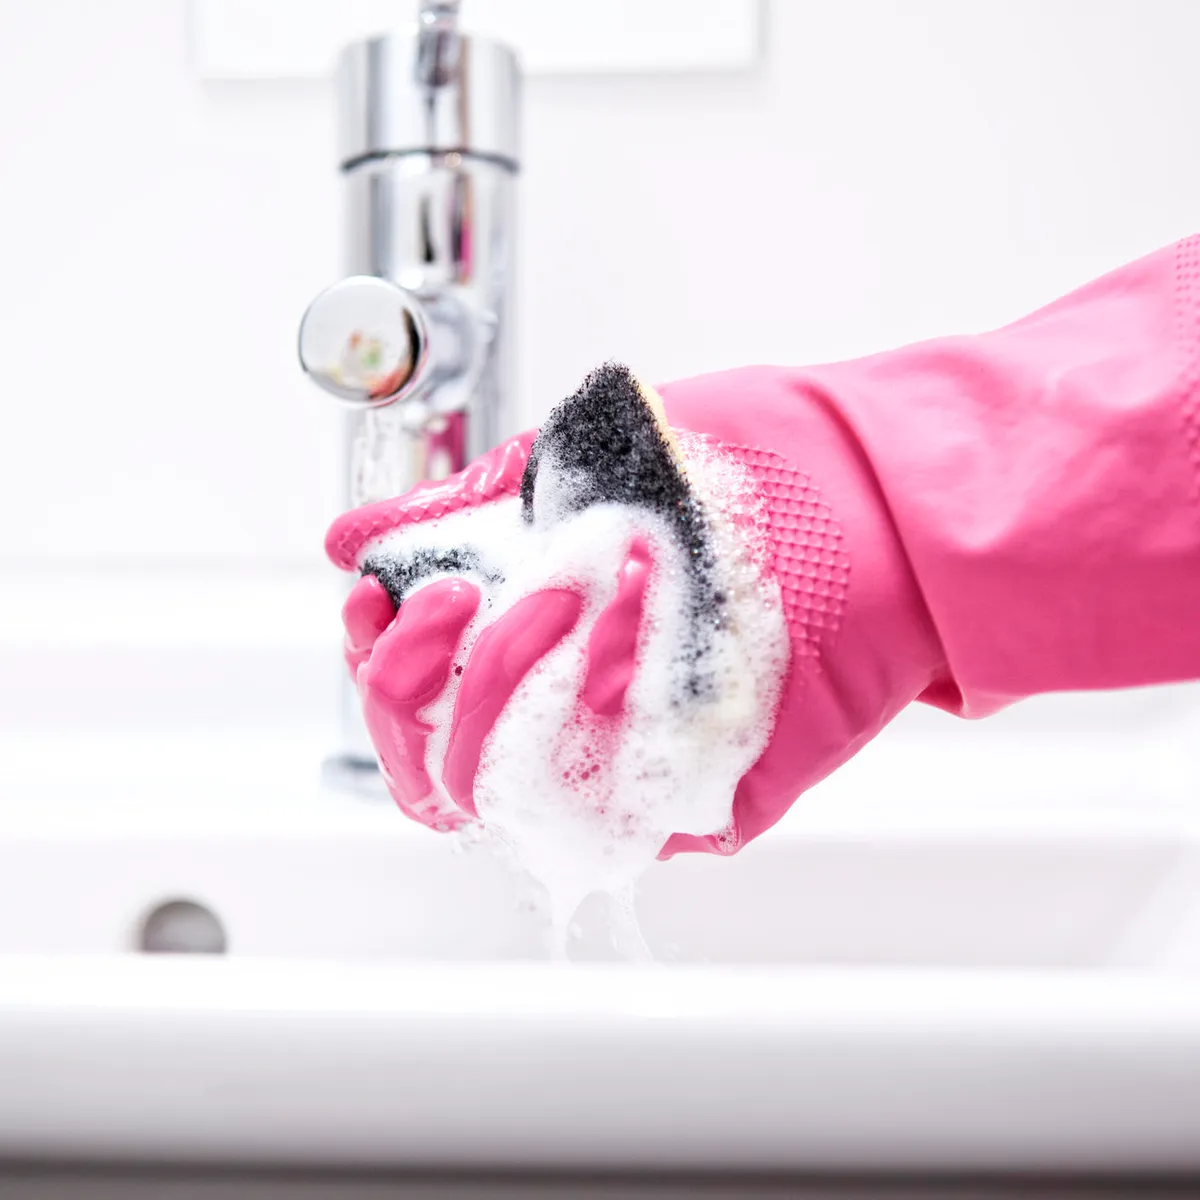 Use gloves to use detergents